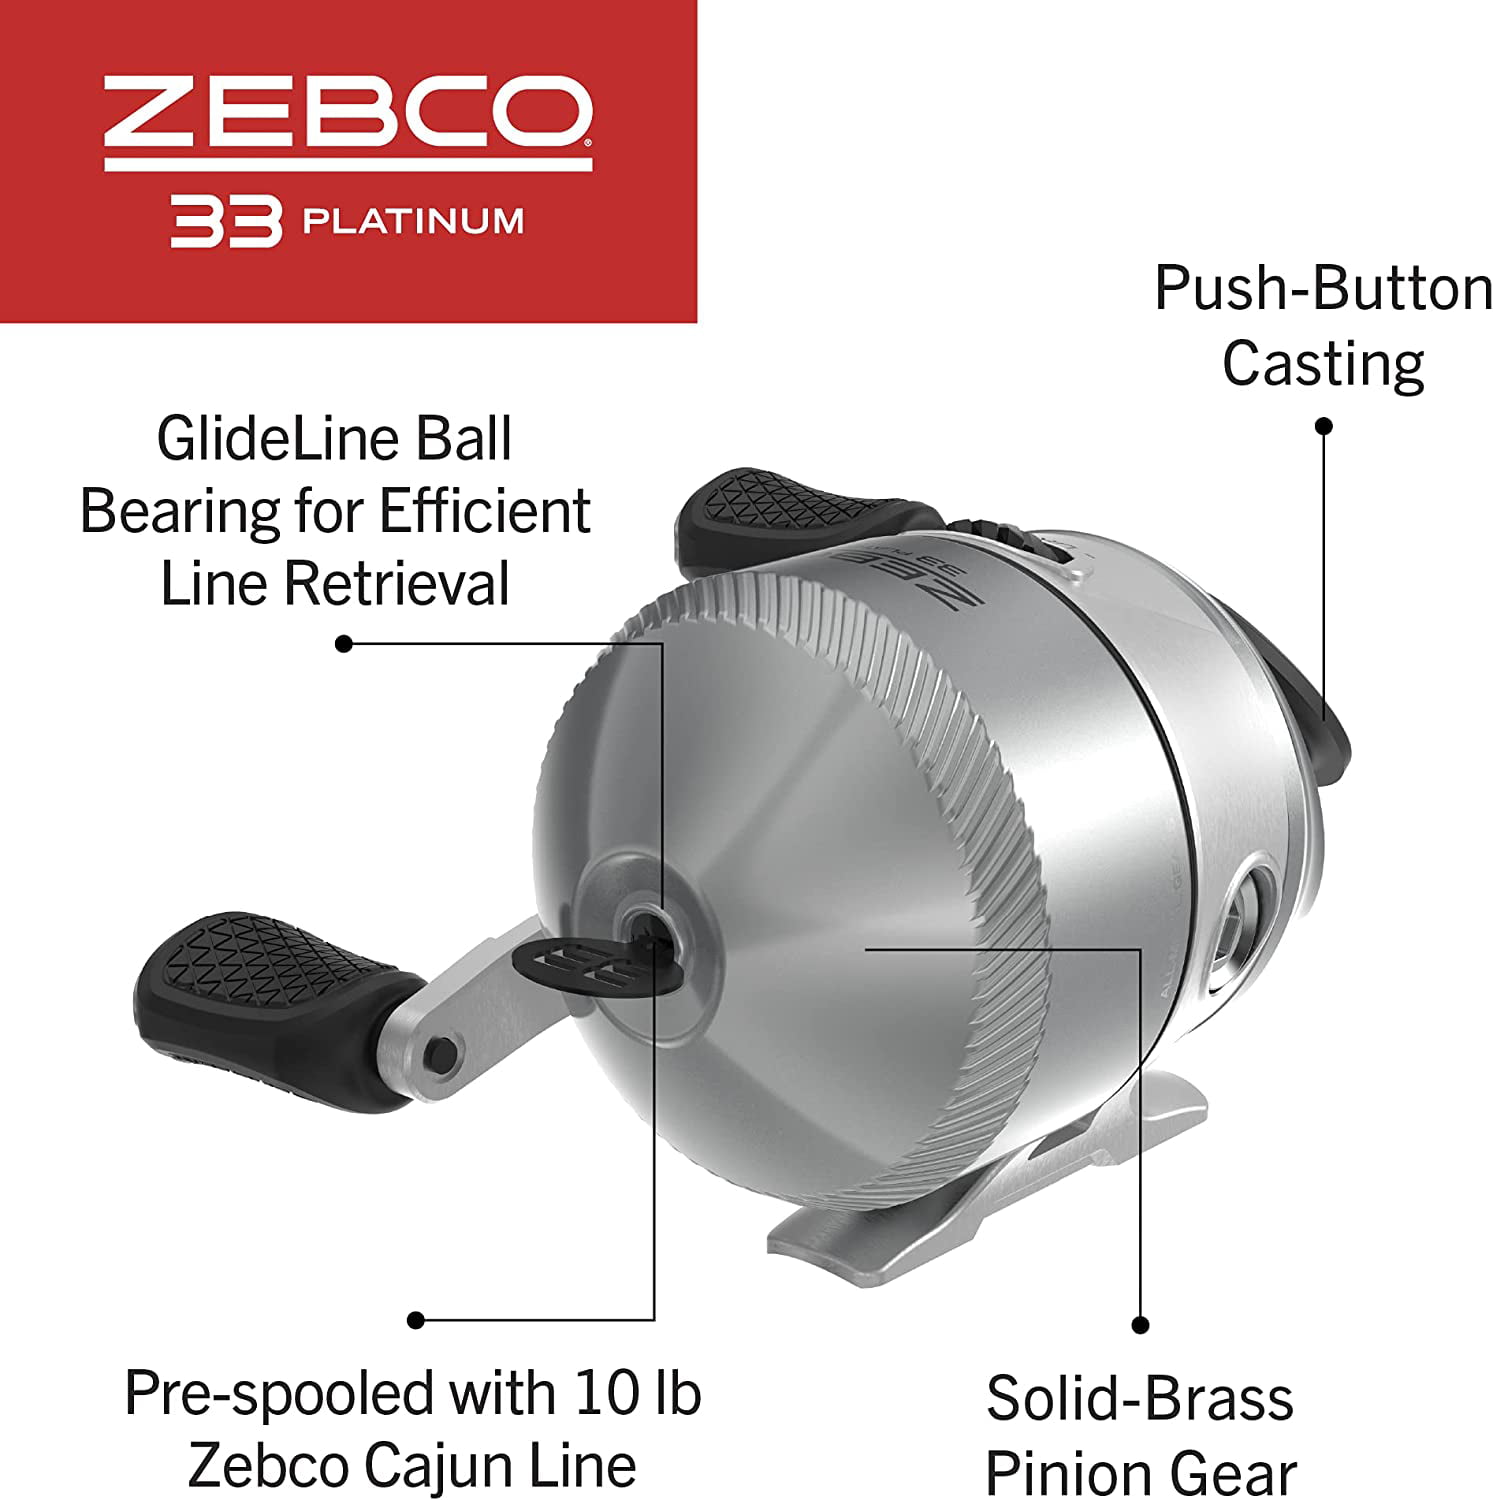 Zebco 33 Platinum Spincast Fishing Reel, Size 30 Reel, Changeable Right- or  Left-Hand Retrieve, All-Metal Construction, 4.7:1 Gear Ratio, Pre-spooled